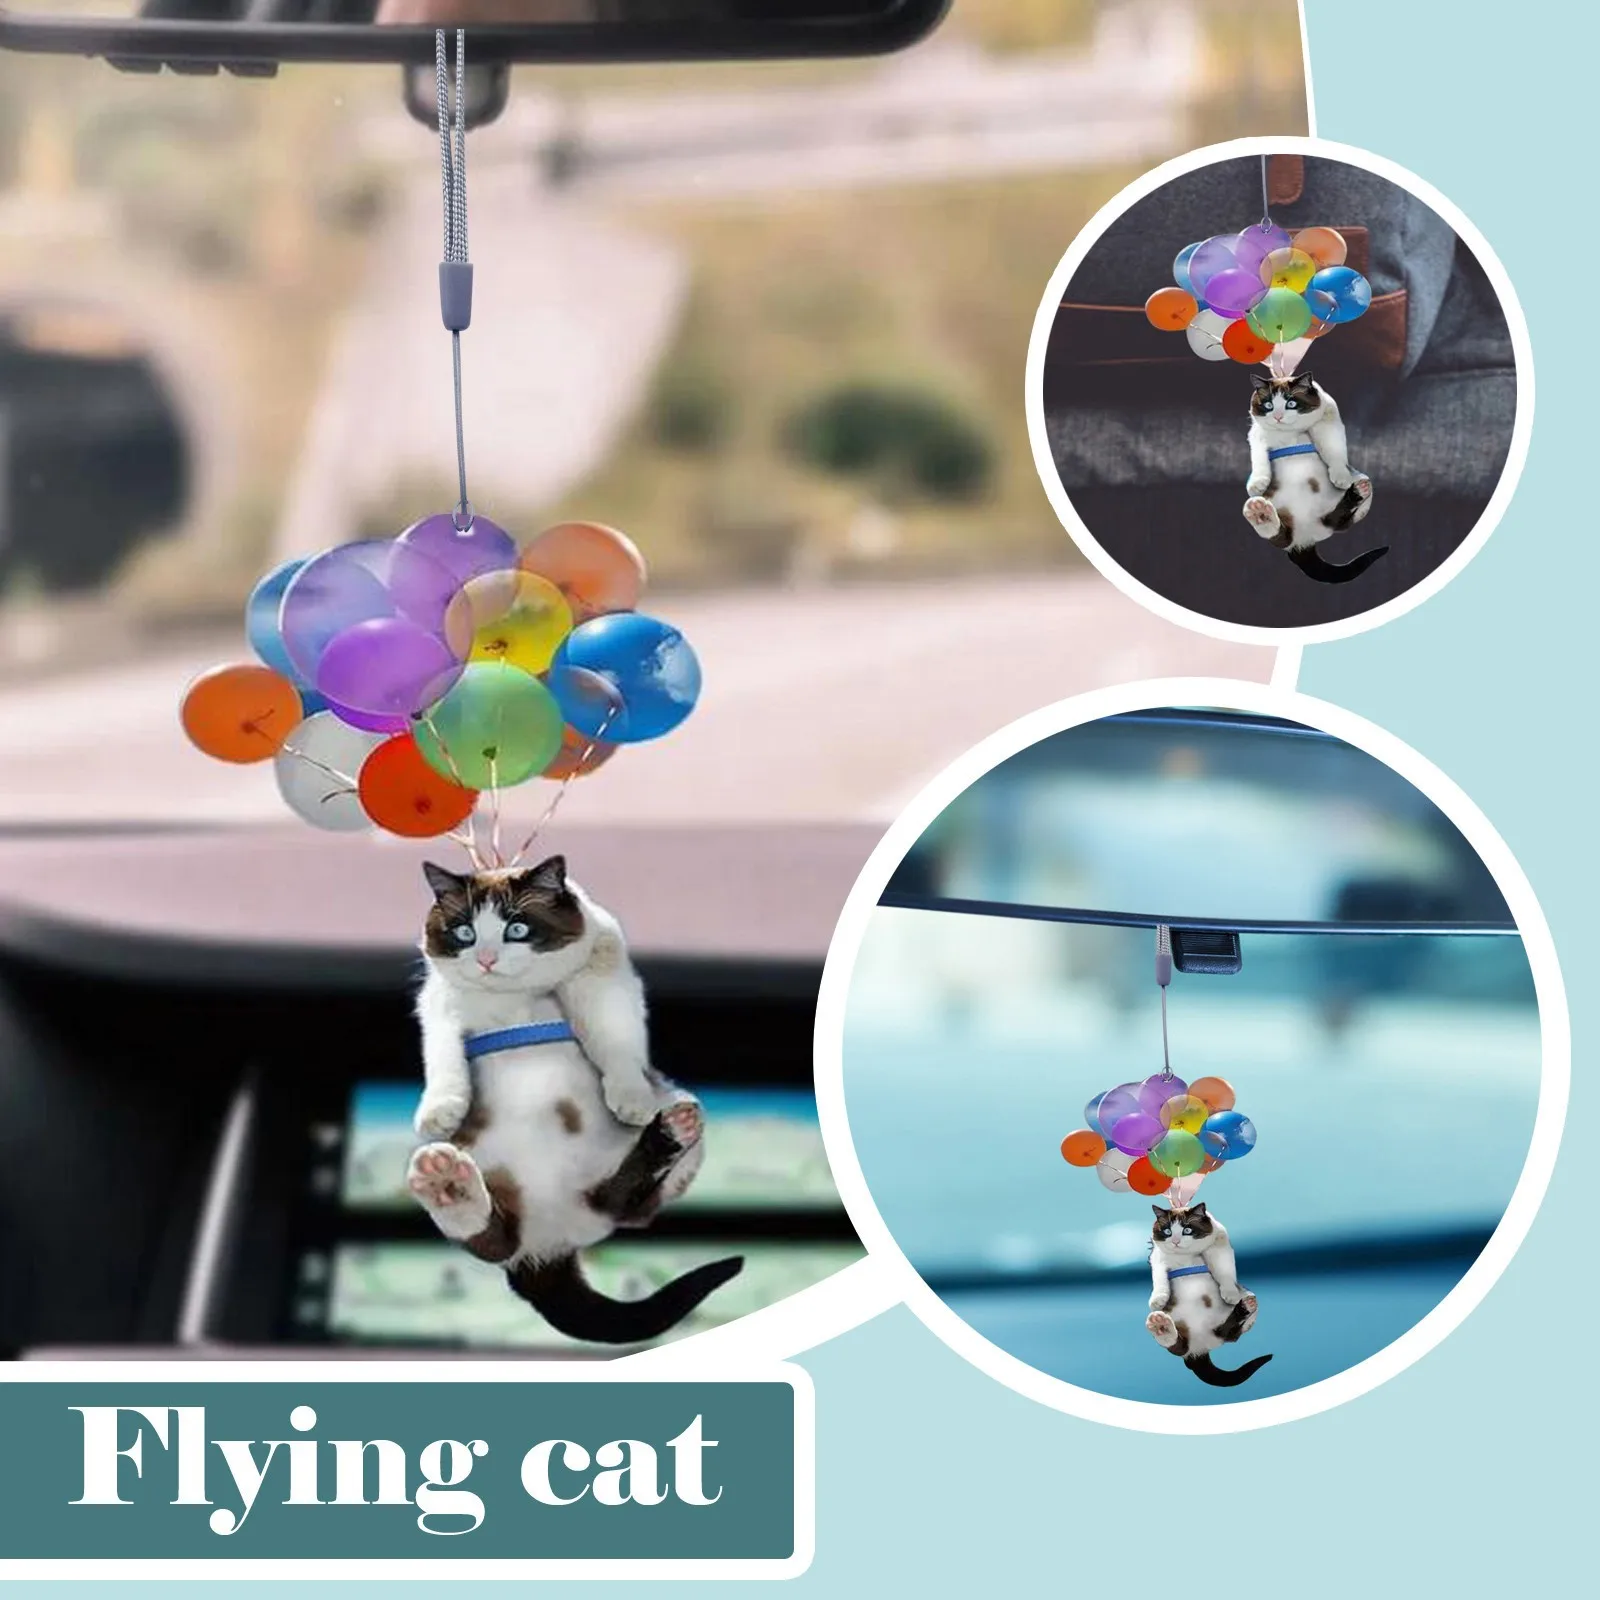 Details about   Car Flying Cat Hanging Ornament with Colorful Balloon Hanging Ornament Art Decor 